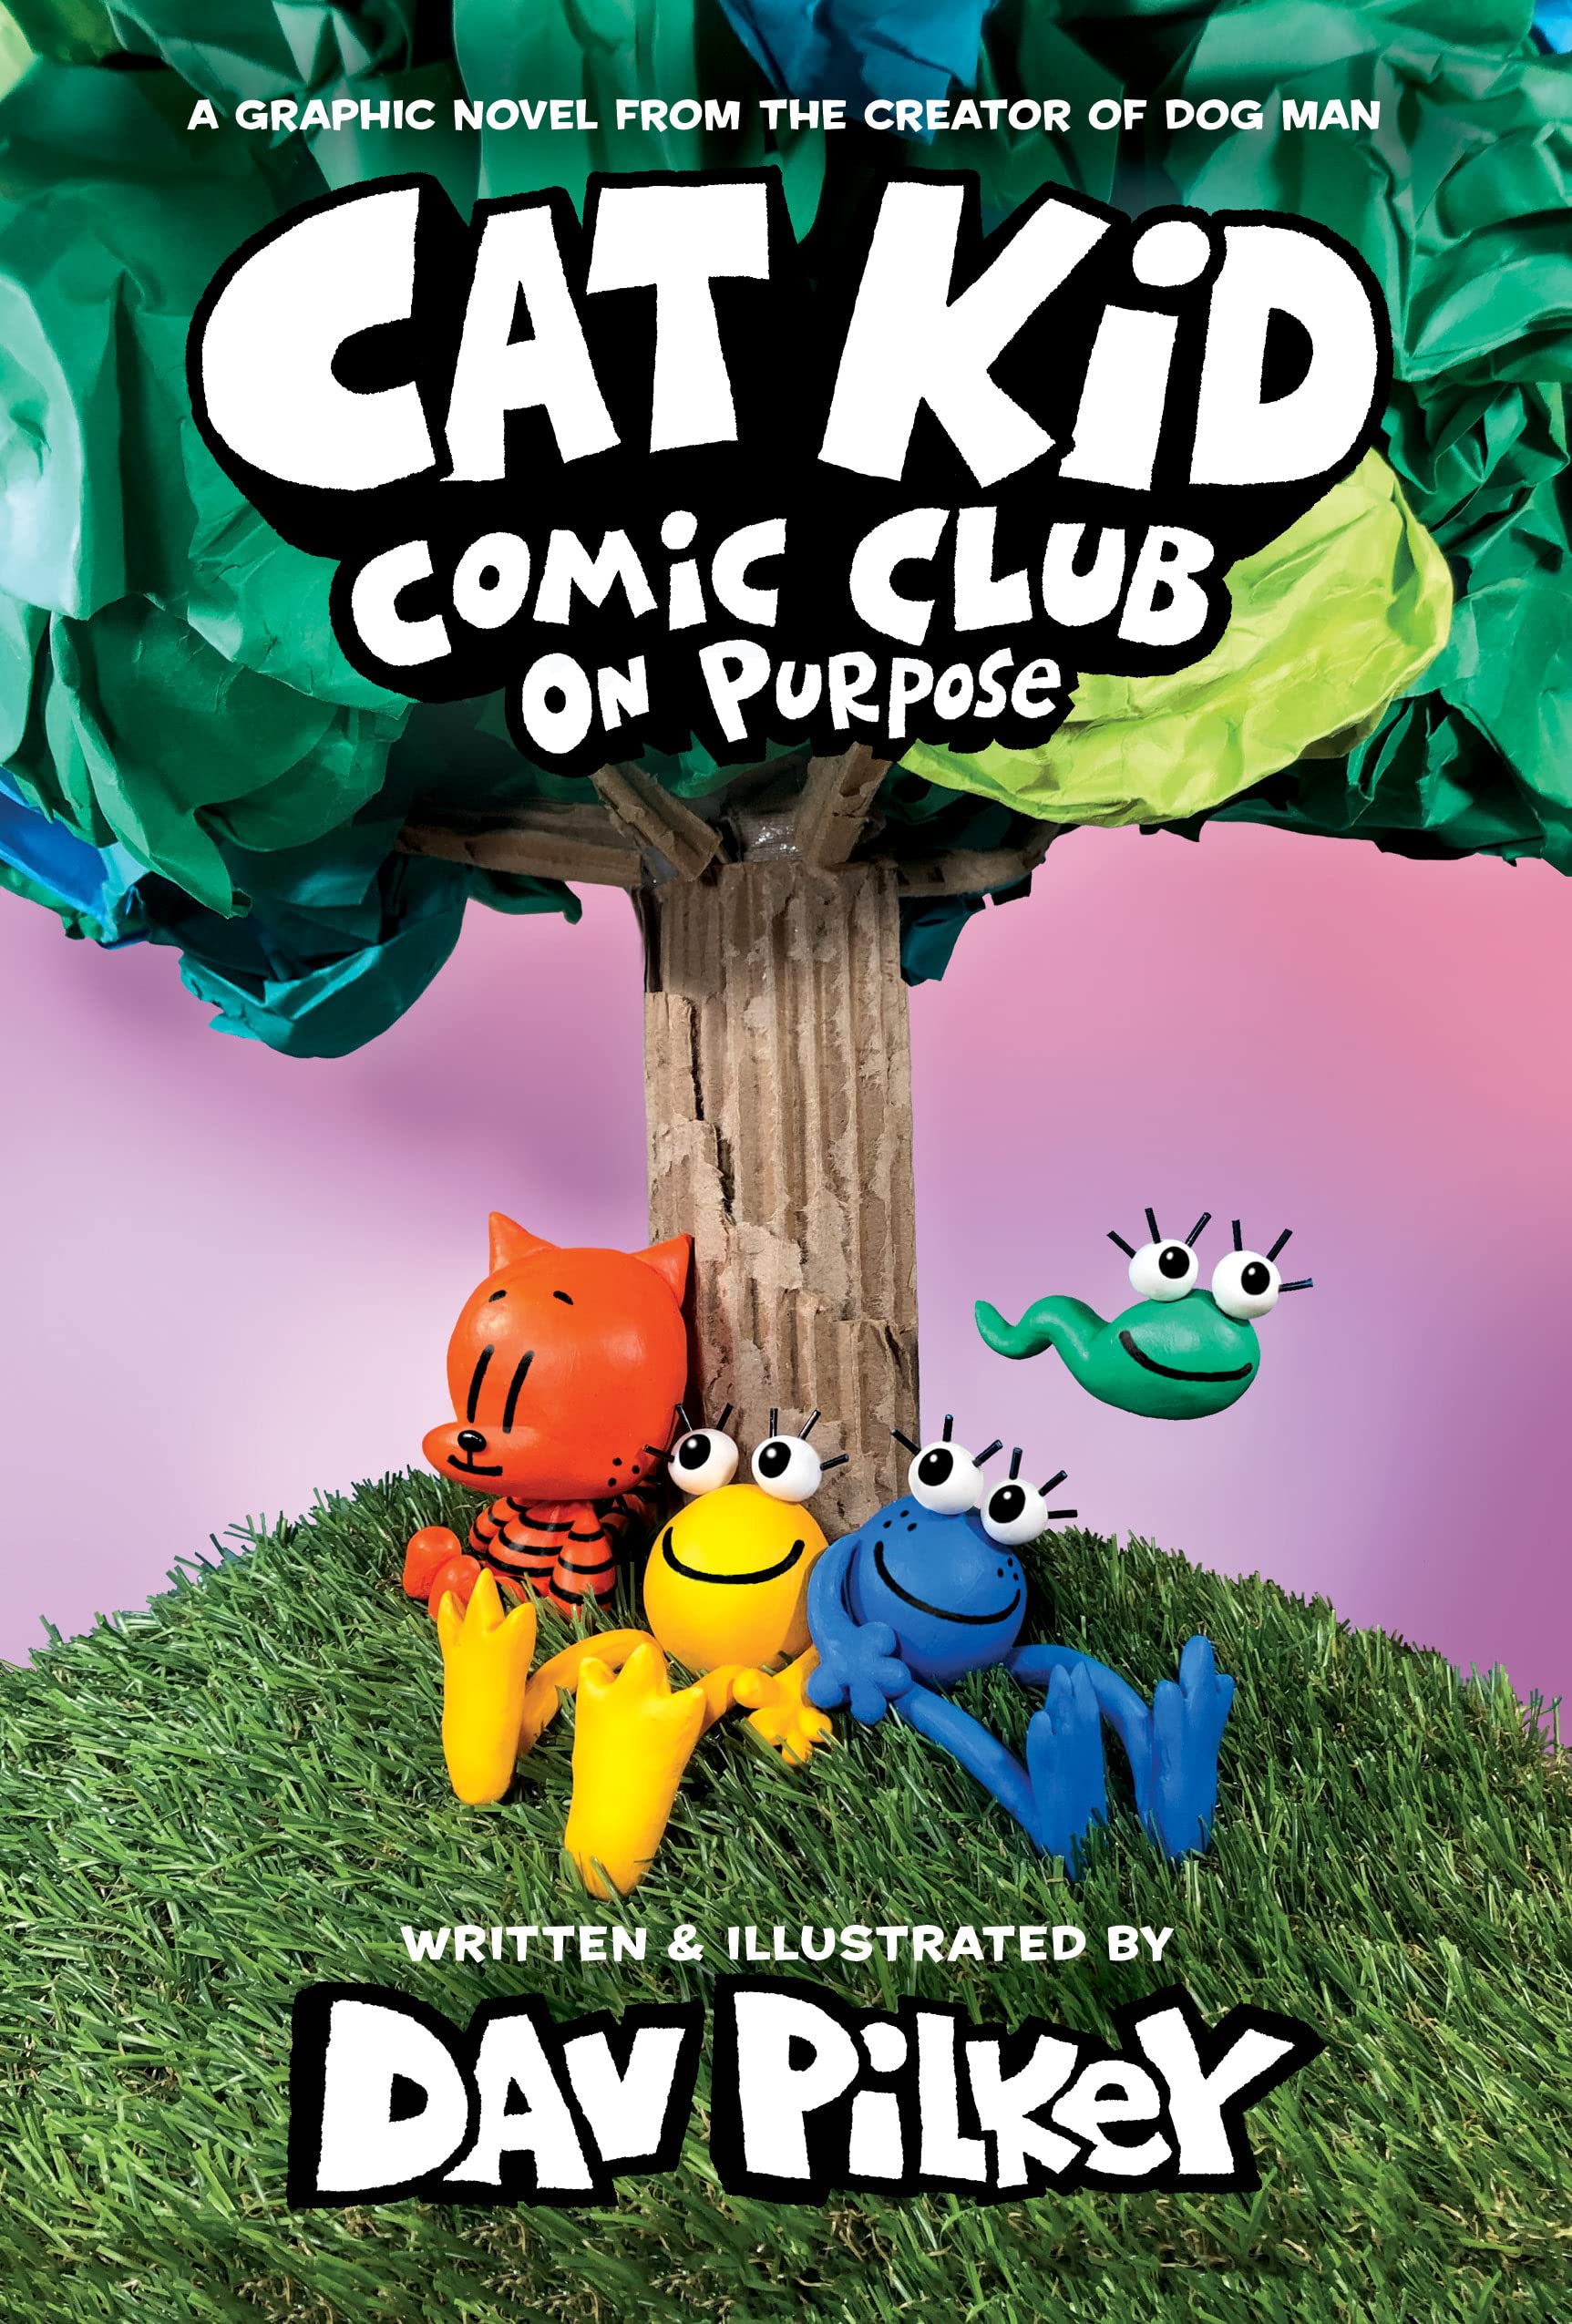 Cat Kid Comic Club 3: On Purpose (A Graphic Novel) (A Graphic Novel From the Creator of Dog Man, 도그맨 원서)